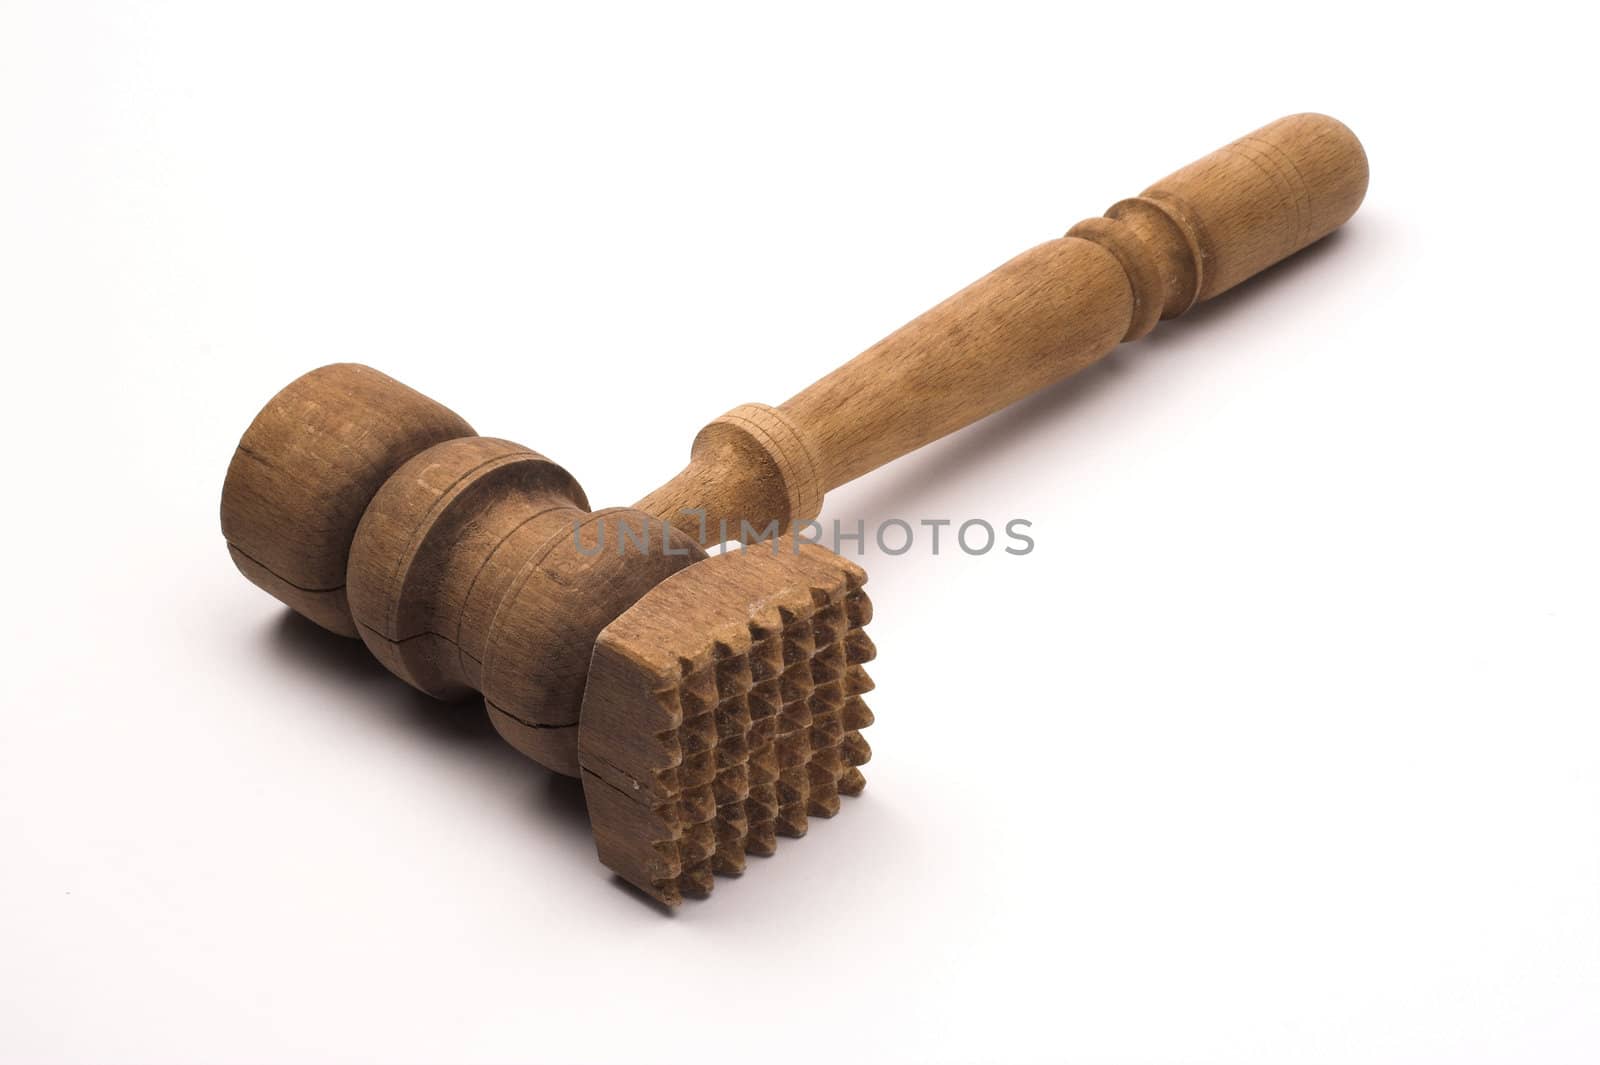  Wooden meat hammer on white background